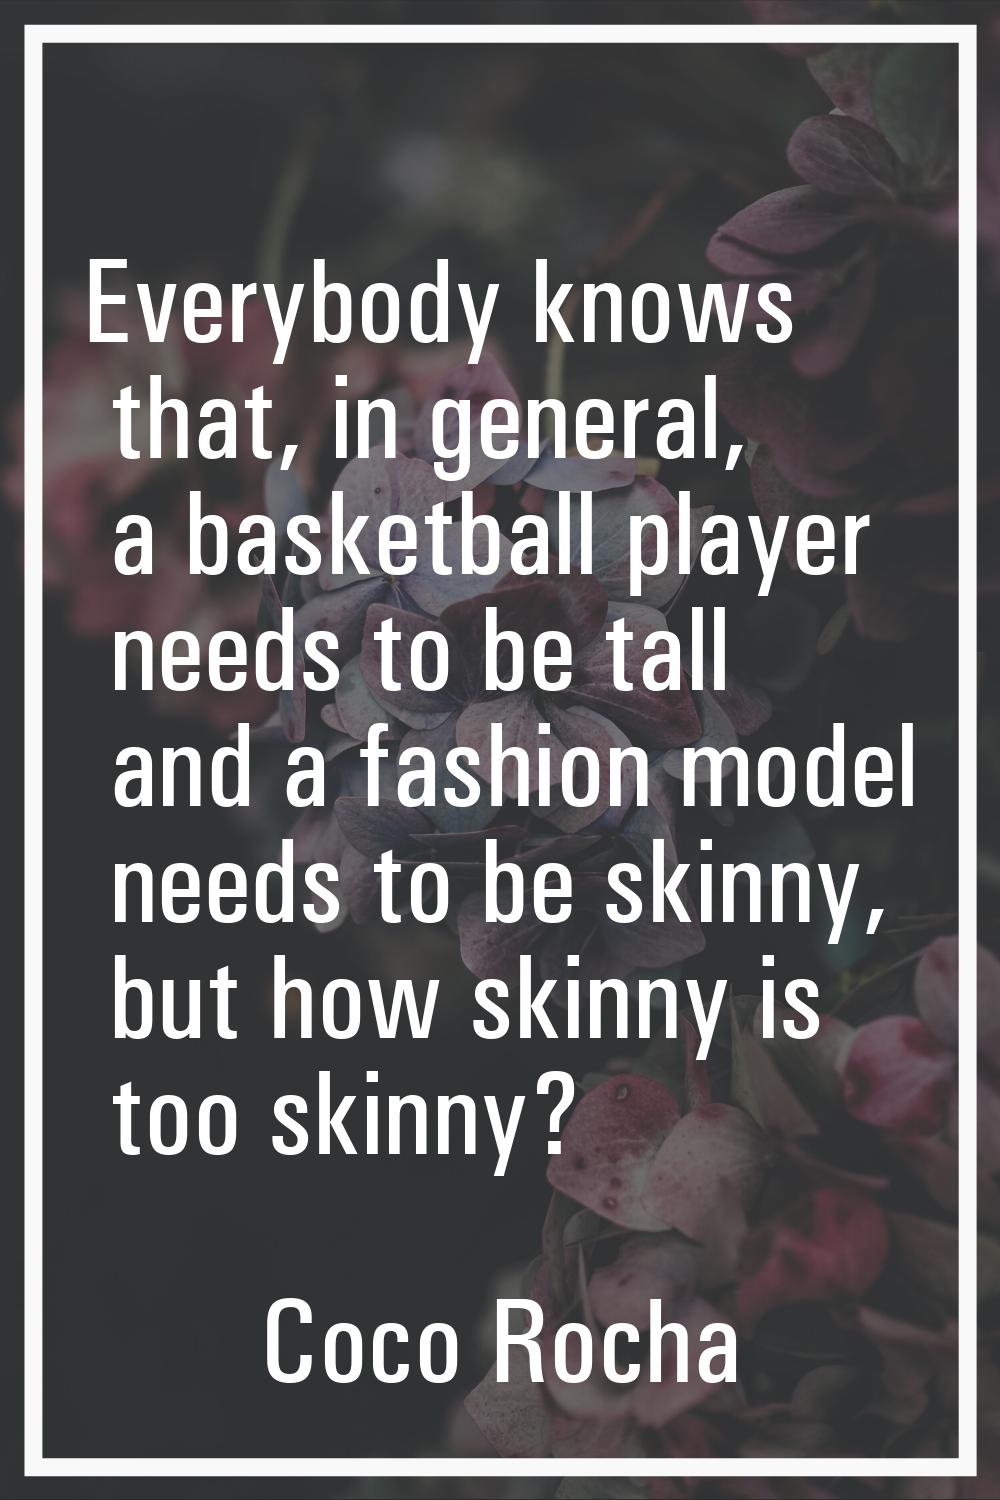 Everybody knows that, in general, a basketball player needs to be tall and a fashion model needs to